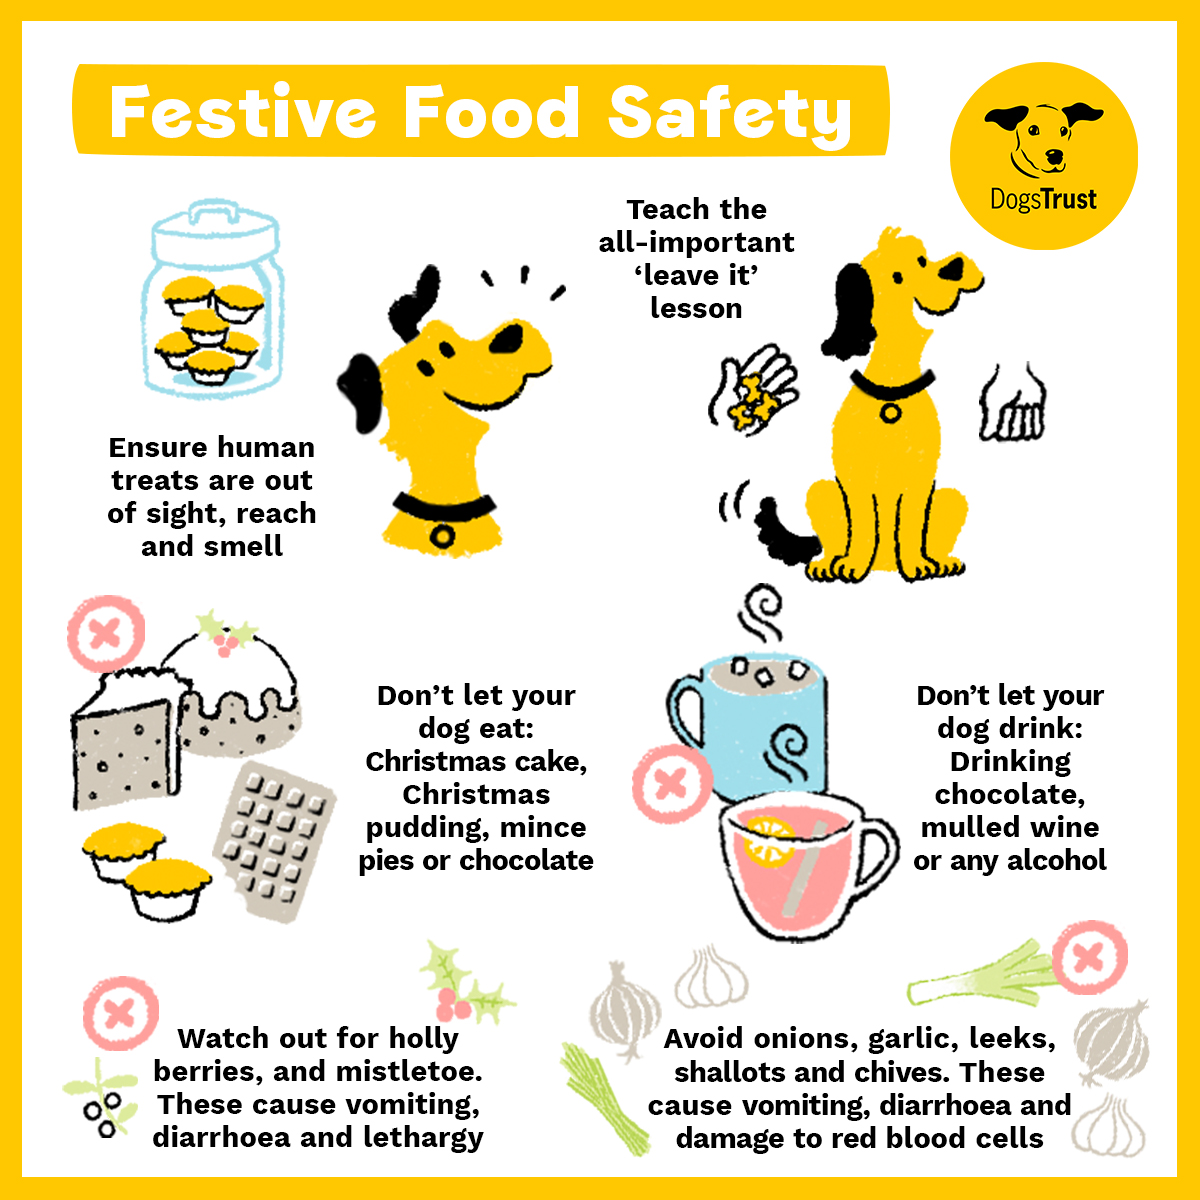 Festivities are beginning and so are all the yummy treats! 🎄 Please remember to keep your pooches safe around all the Christmas food, especially those that are toxic for them! 🐶💛